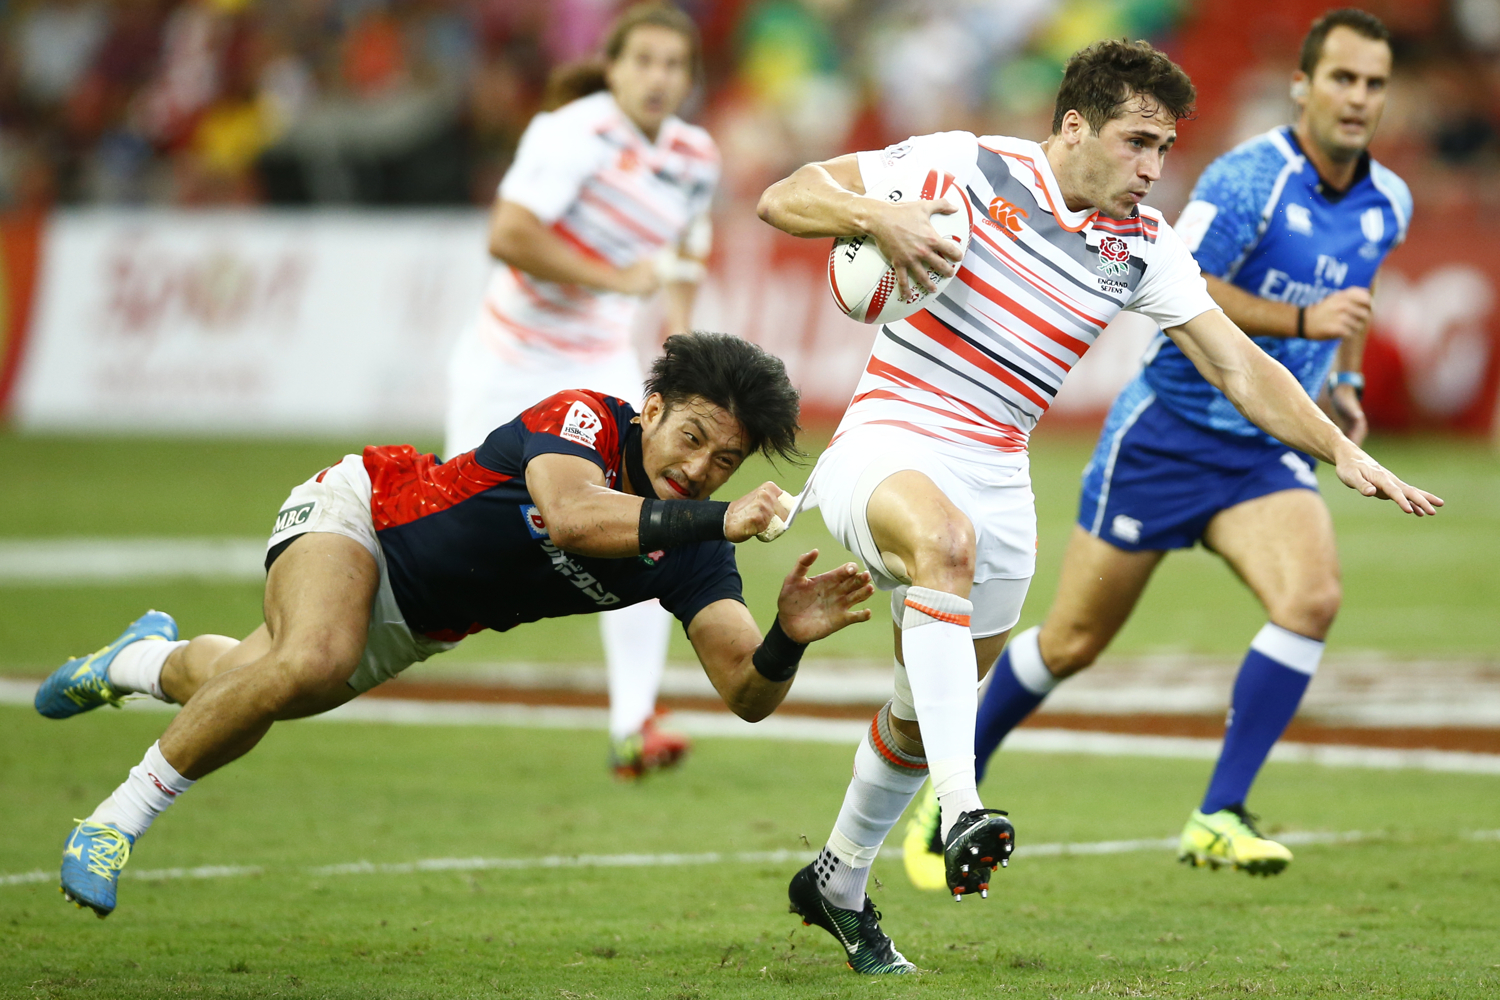  Rugby Union - Singapore Sevens - National Stadium, Singapore, 15/04/17 - England's Oliver Lindsay-Hague is tackled by Japan's Dai Ozawa. REUTERS/Yong Teck Lim 